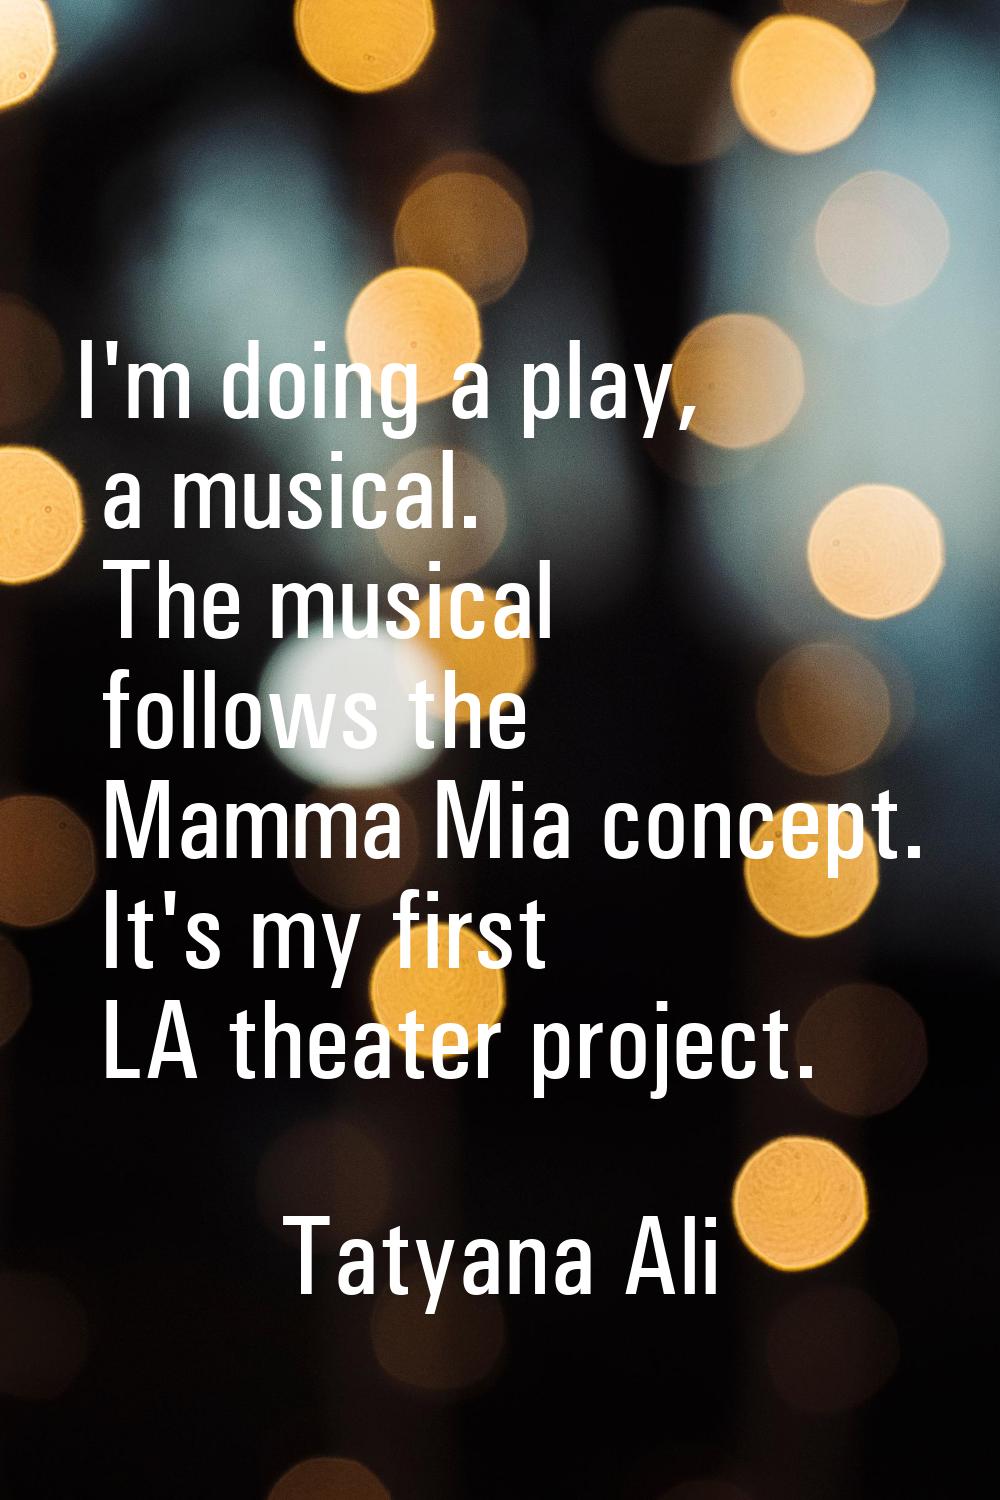 I'm doing a play, a musical. The musical follows the Mamma Mia concept. It's my first LA theater pr